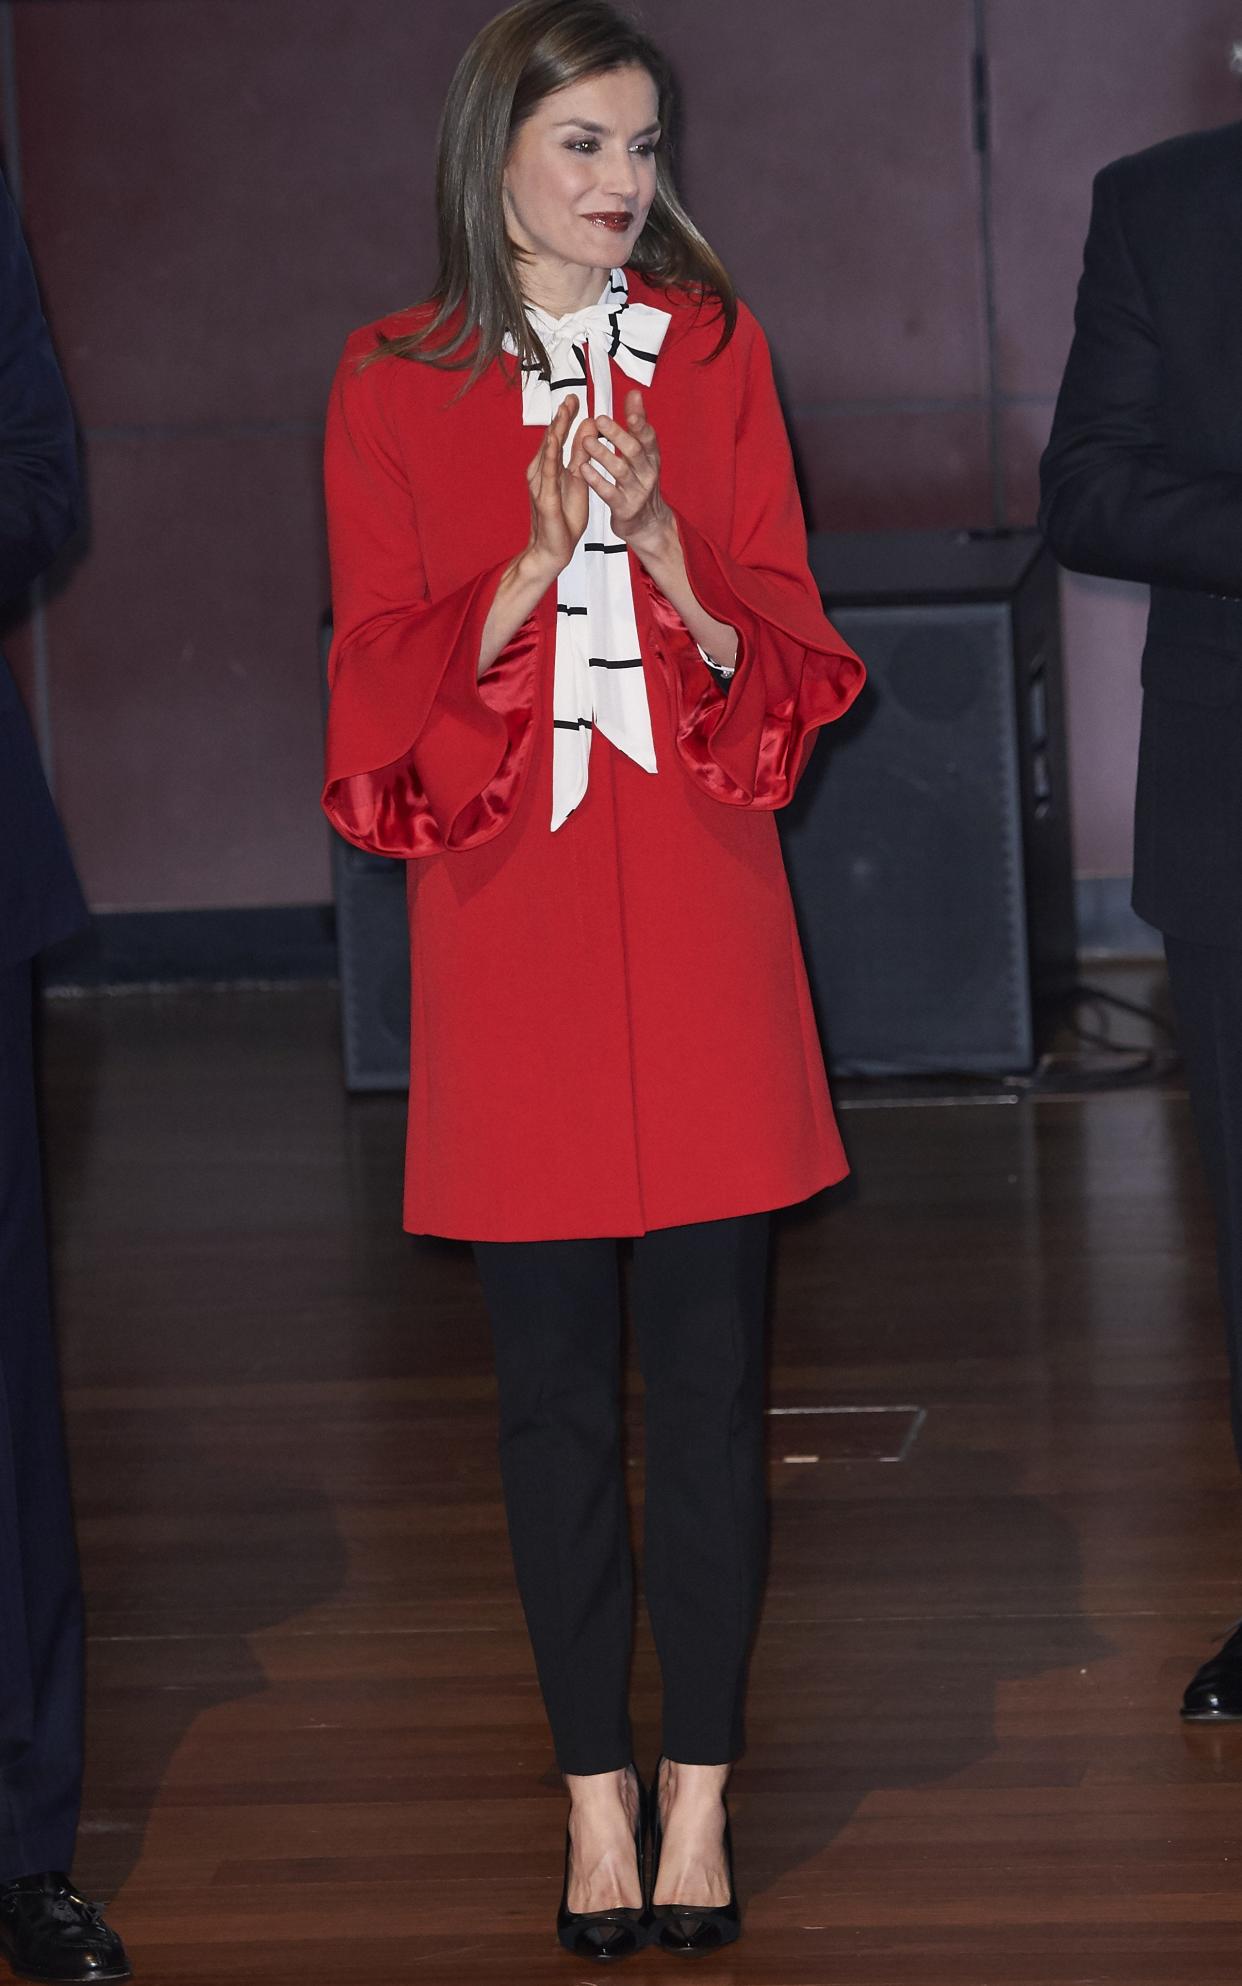 Queen Letizia of Spain wore a pussy-bow blouse and crimson coat for a ceremony in Madrid - Copyright (c) 2017 Rex Features. No use without permission.